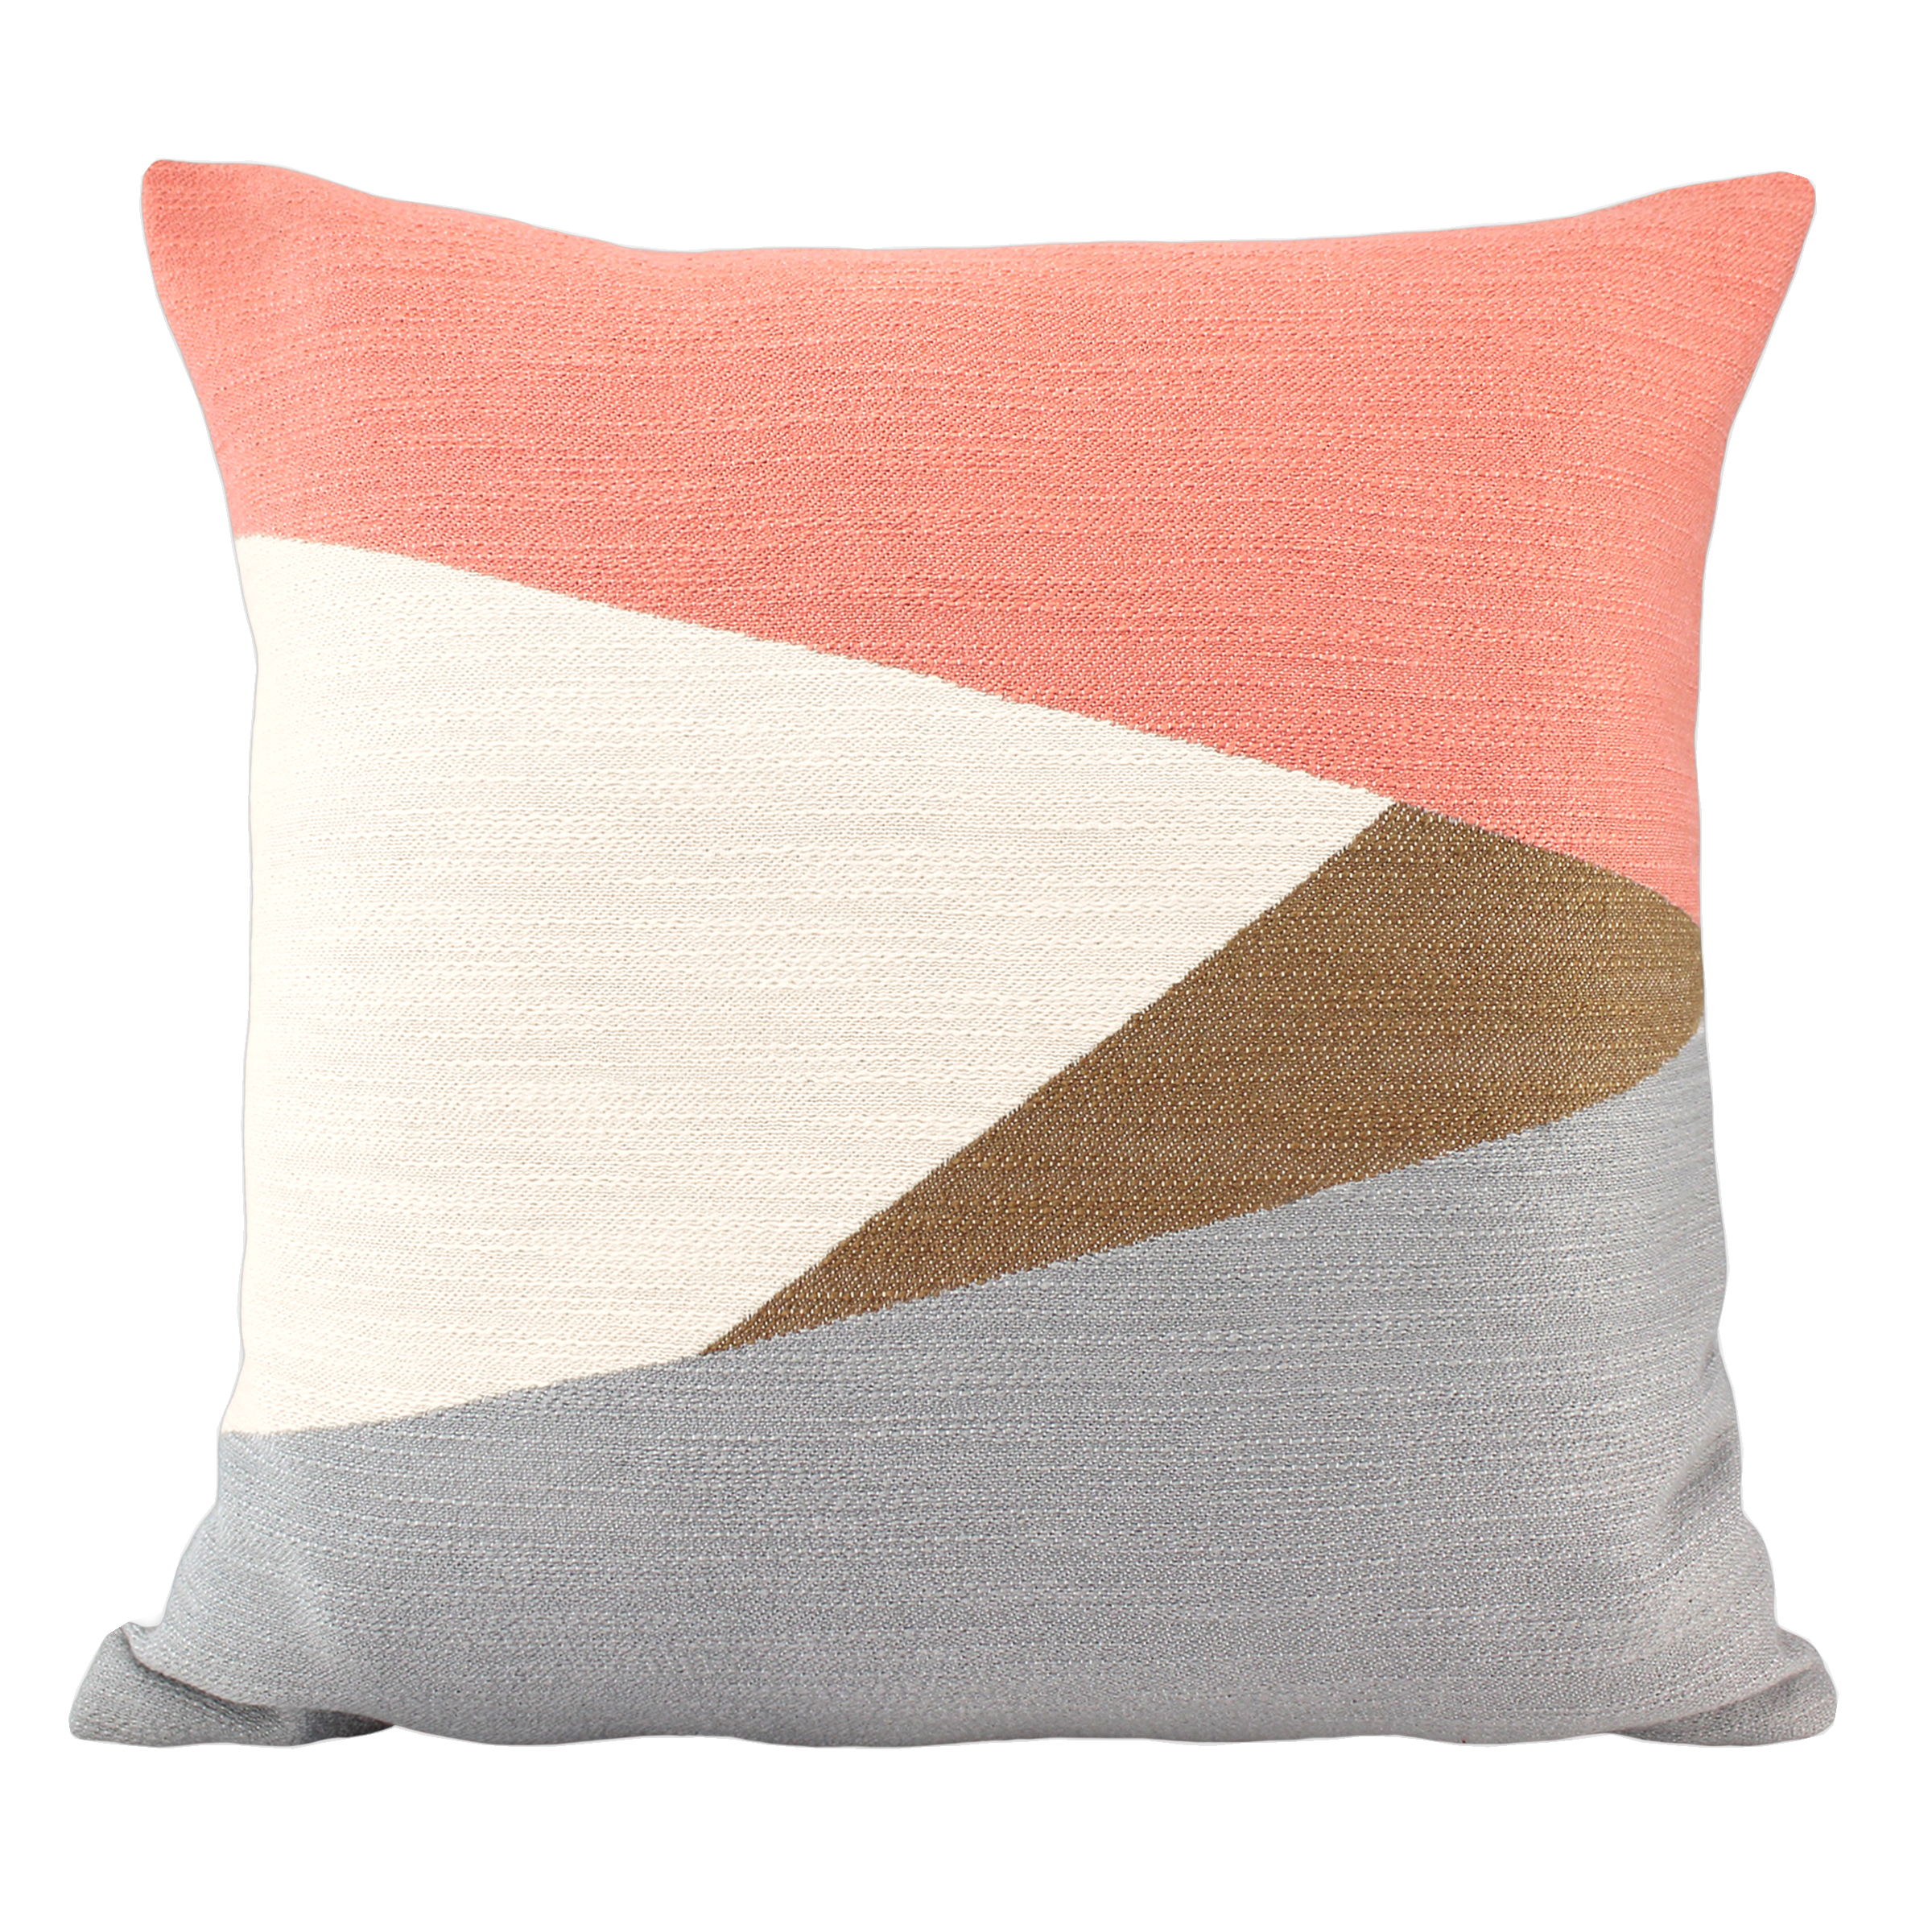 Better Homes & Gardens Triangle Geo Decorative Throw Pillow, 18" x 18", Blush - image 1 of 3